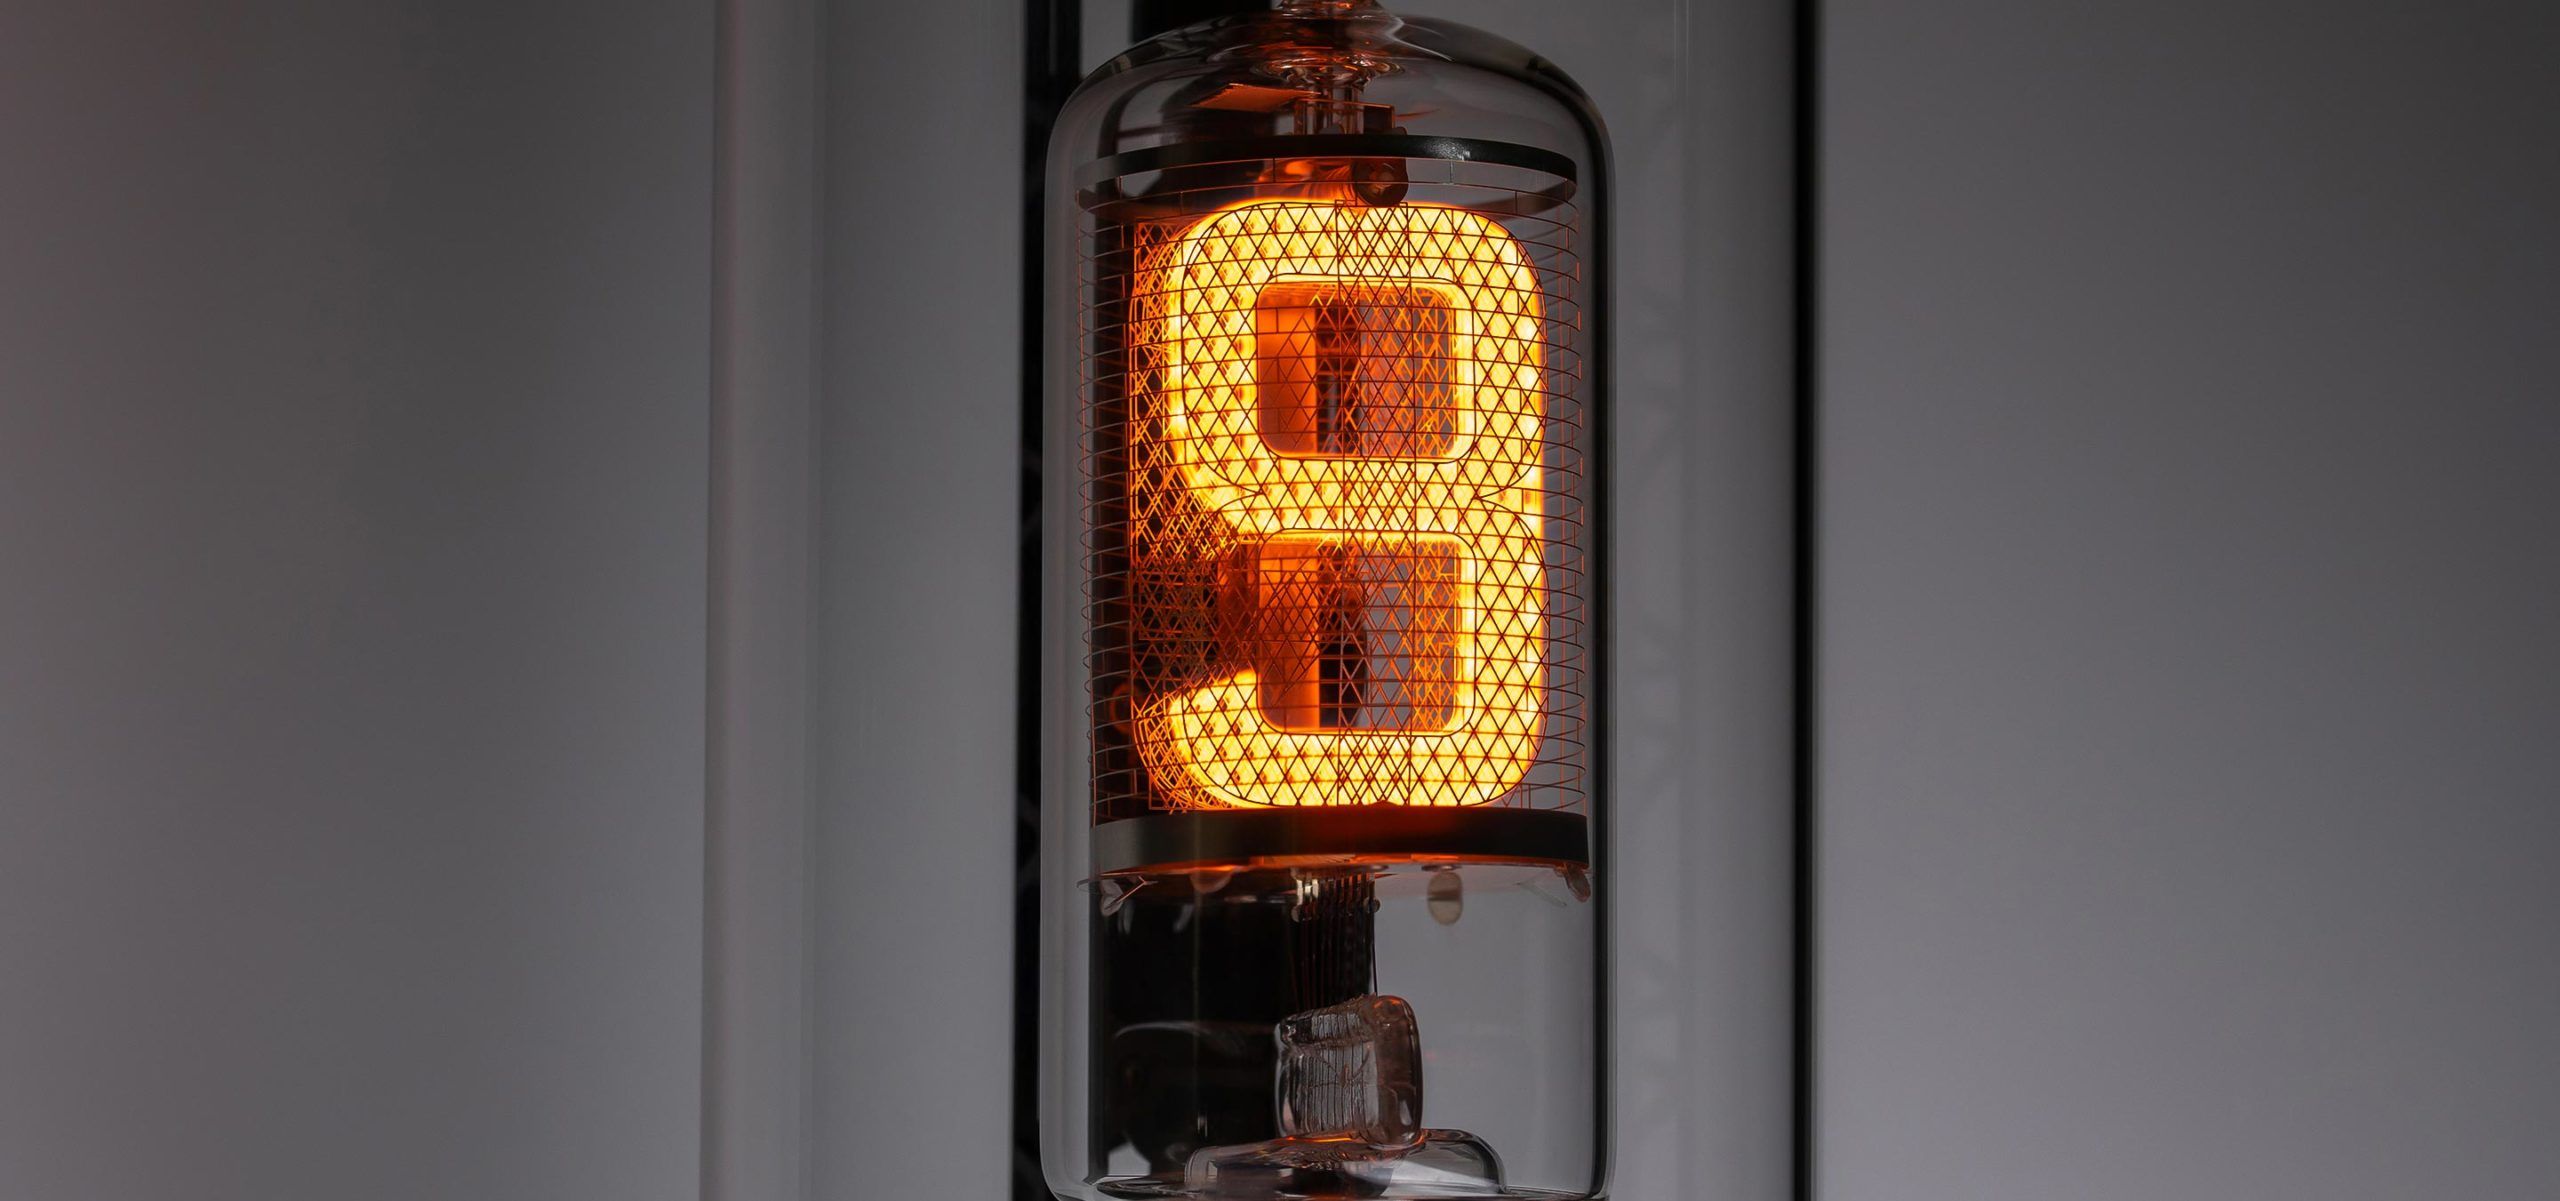 When Time Stands Tall, Emits Amber And Oozes Vintage: Urwerk SpaceTime Blade Clock With Nixie Tubes